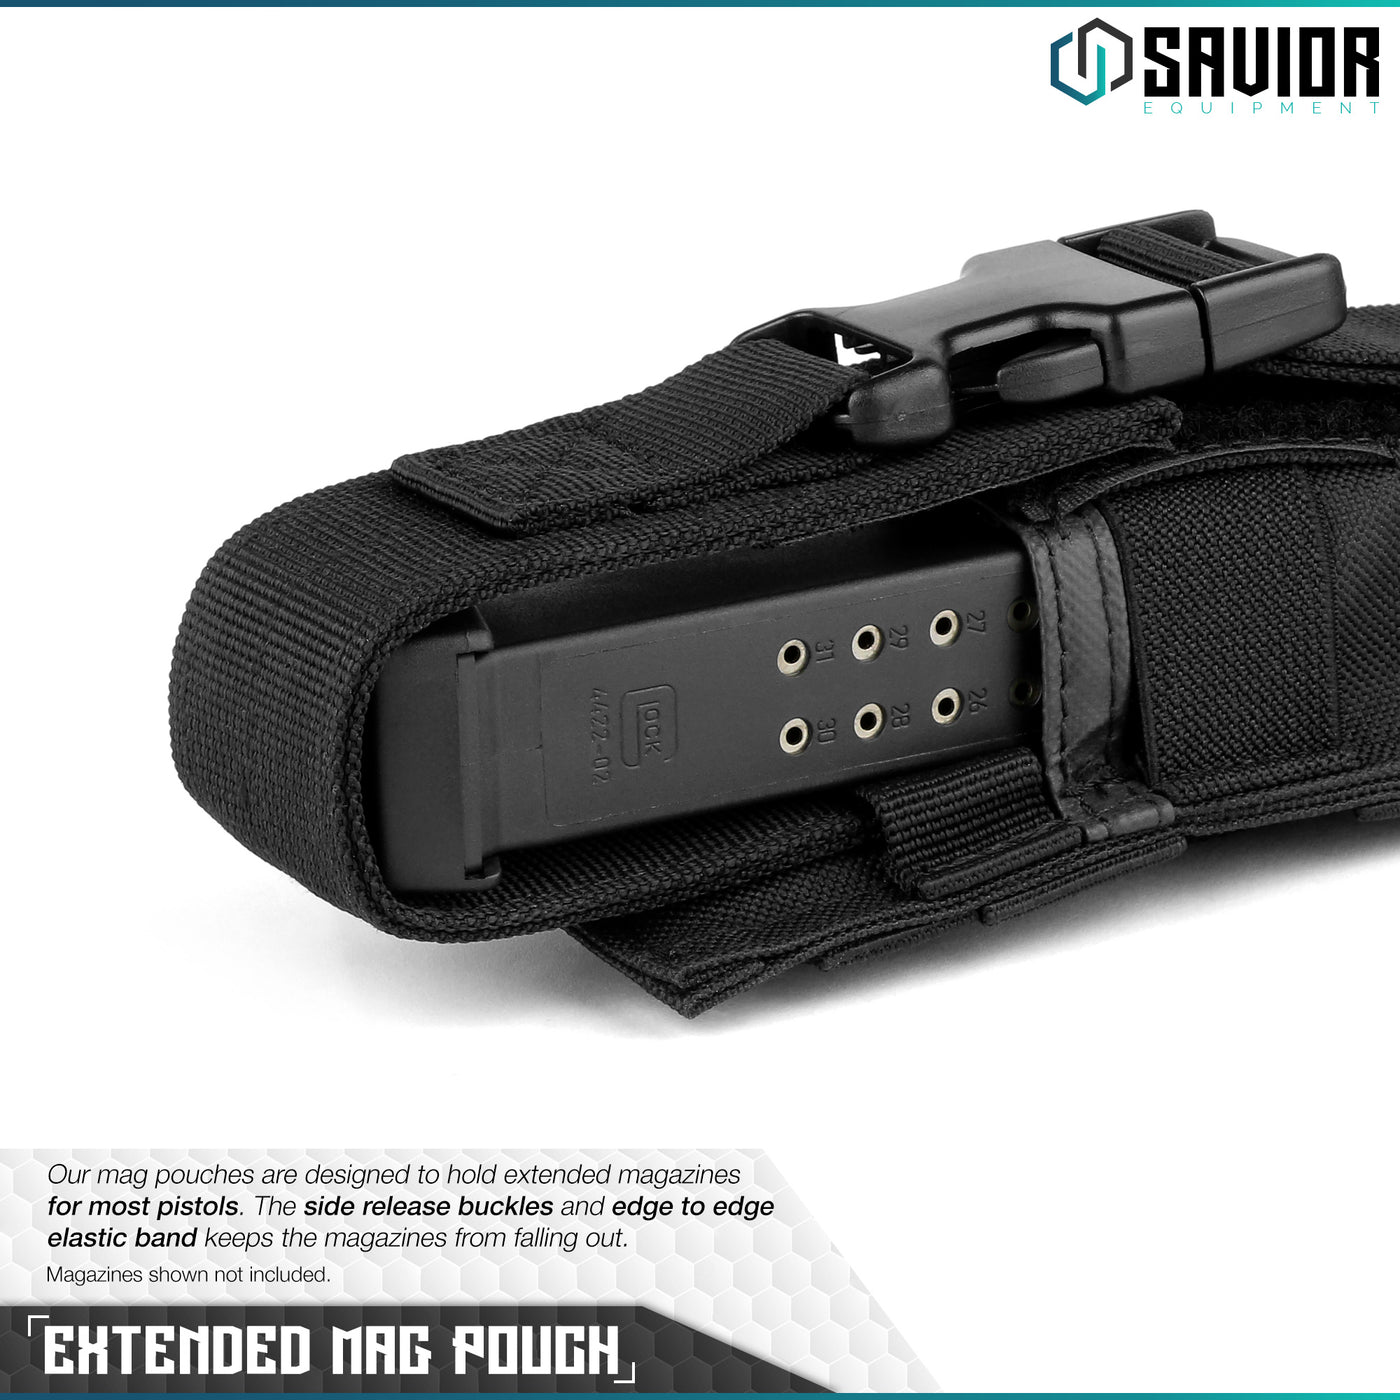 Extended Mag Pouch - Our Mag Pouch is Designed to Hold Extended Magazines for Most Pistols. The Side Release Buckles and Edge-to-Edge Elastic Band Keeps the Magazine From Falling out. Magazines shown not included.